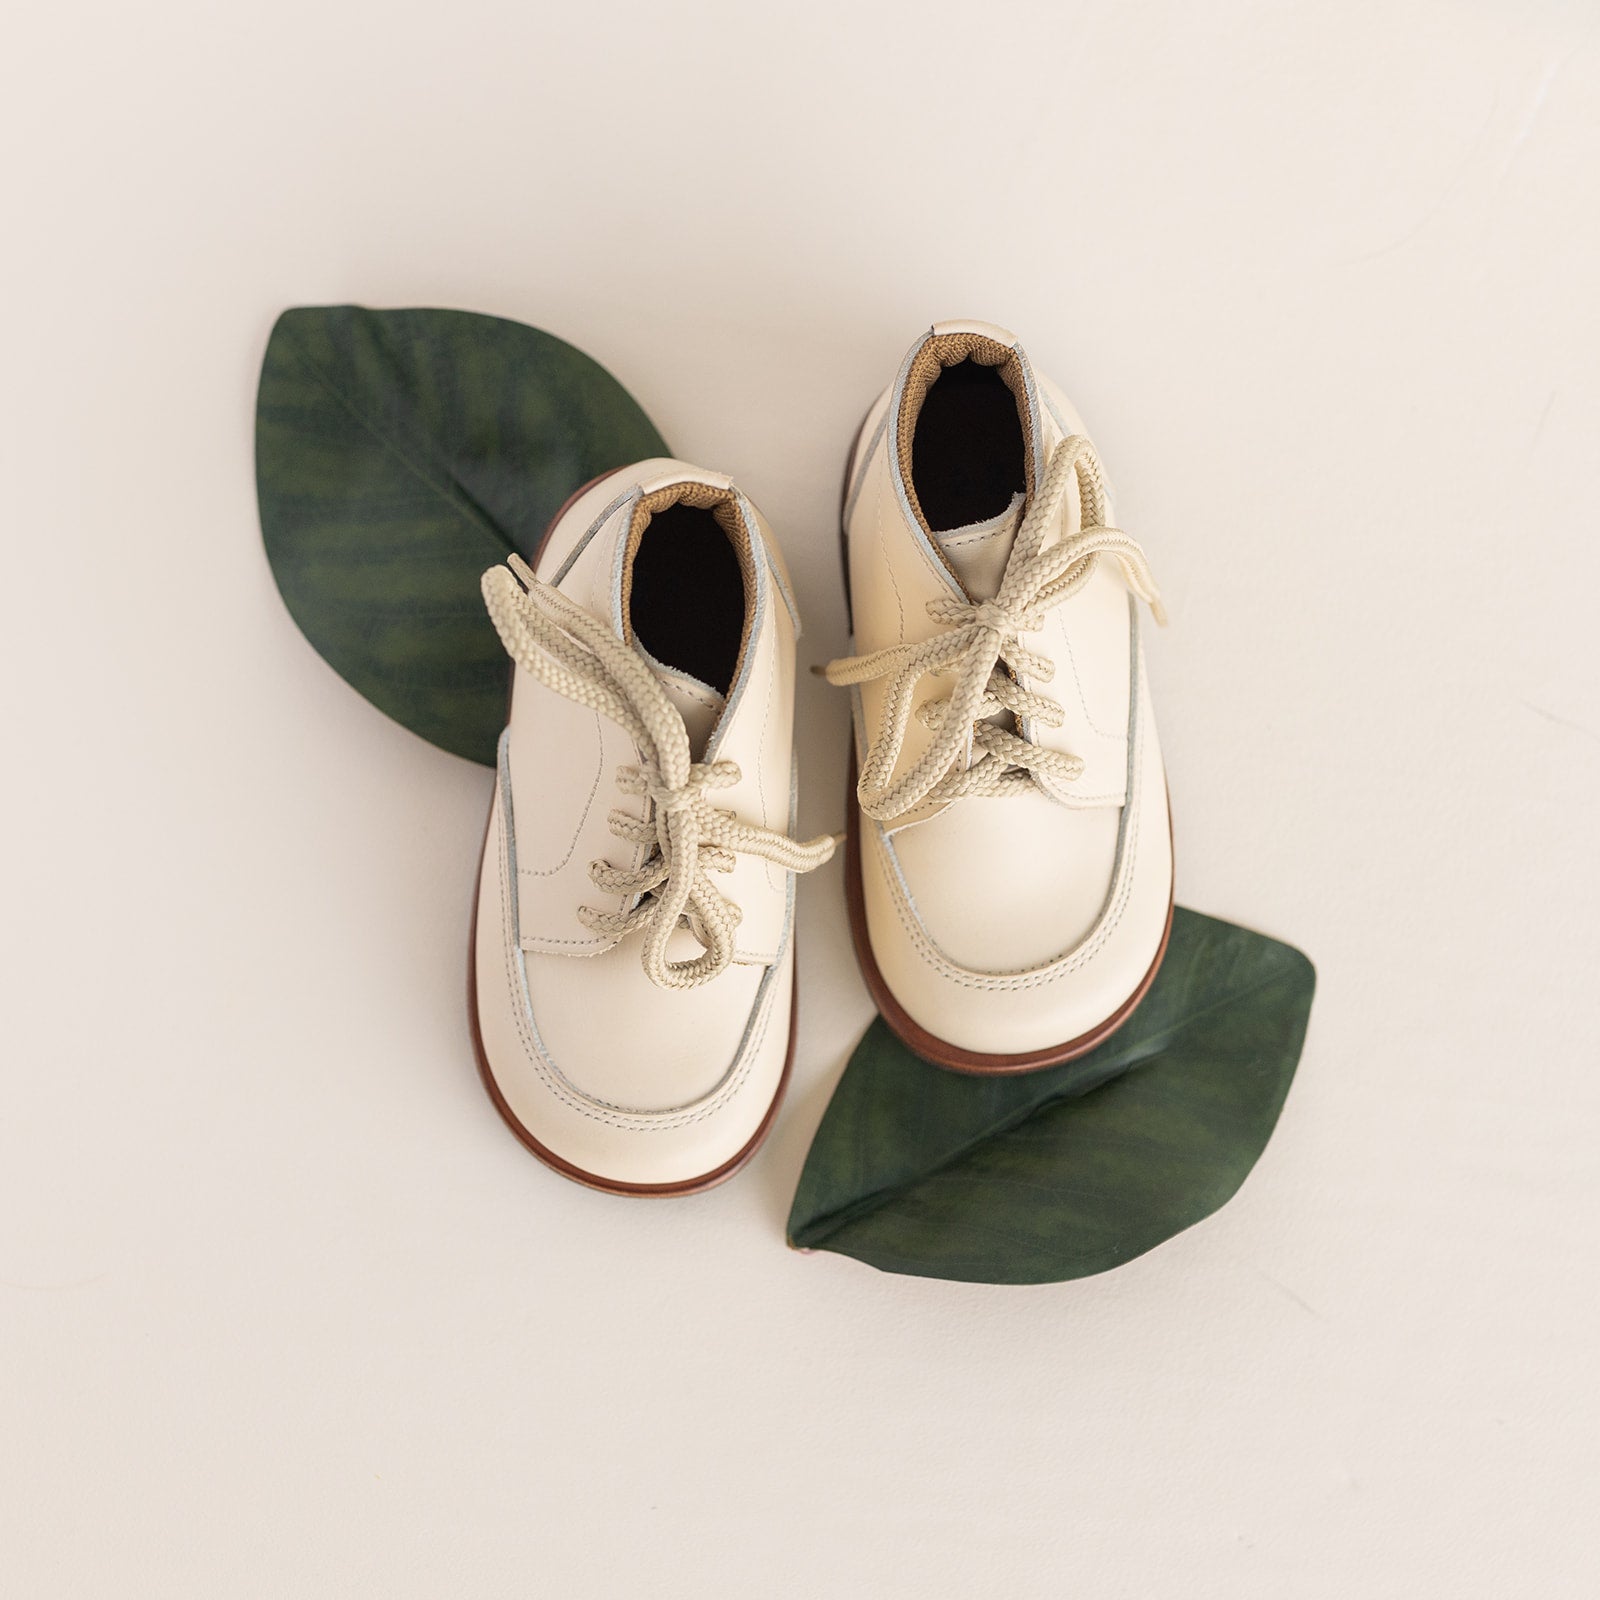 Adelisa &amp; Co cream leather boots for children. Unisex style.